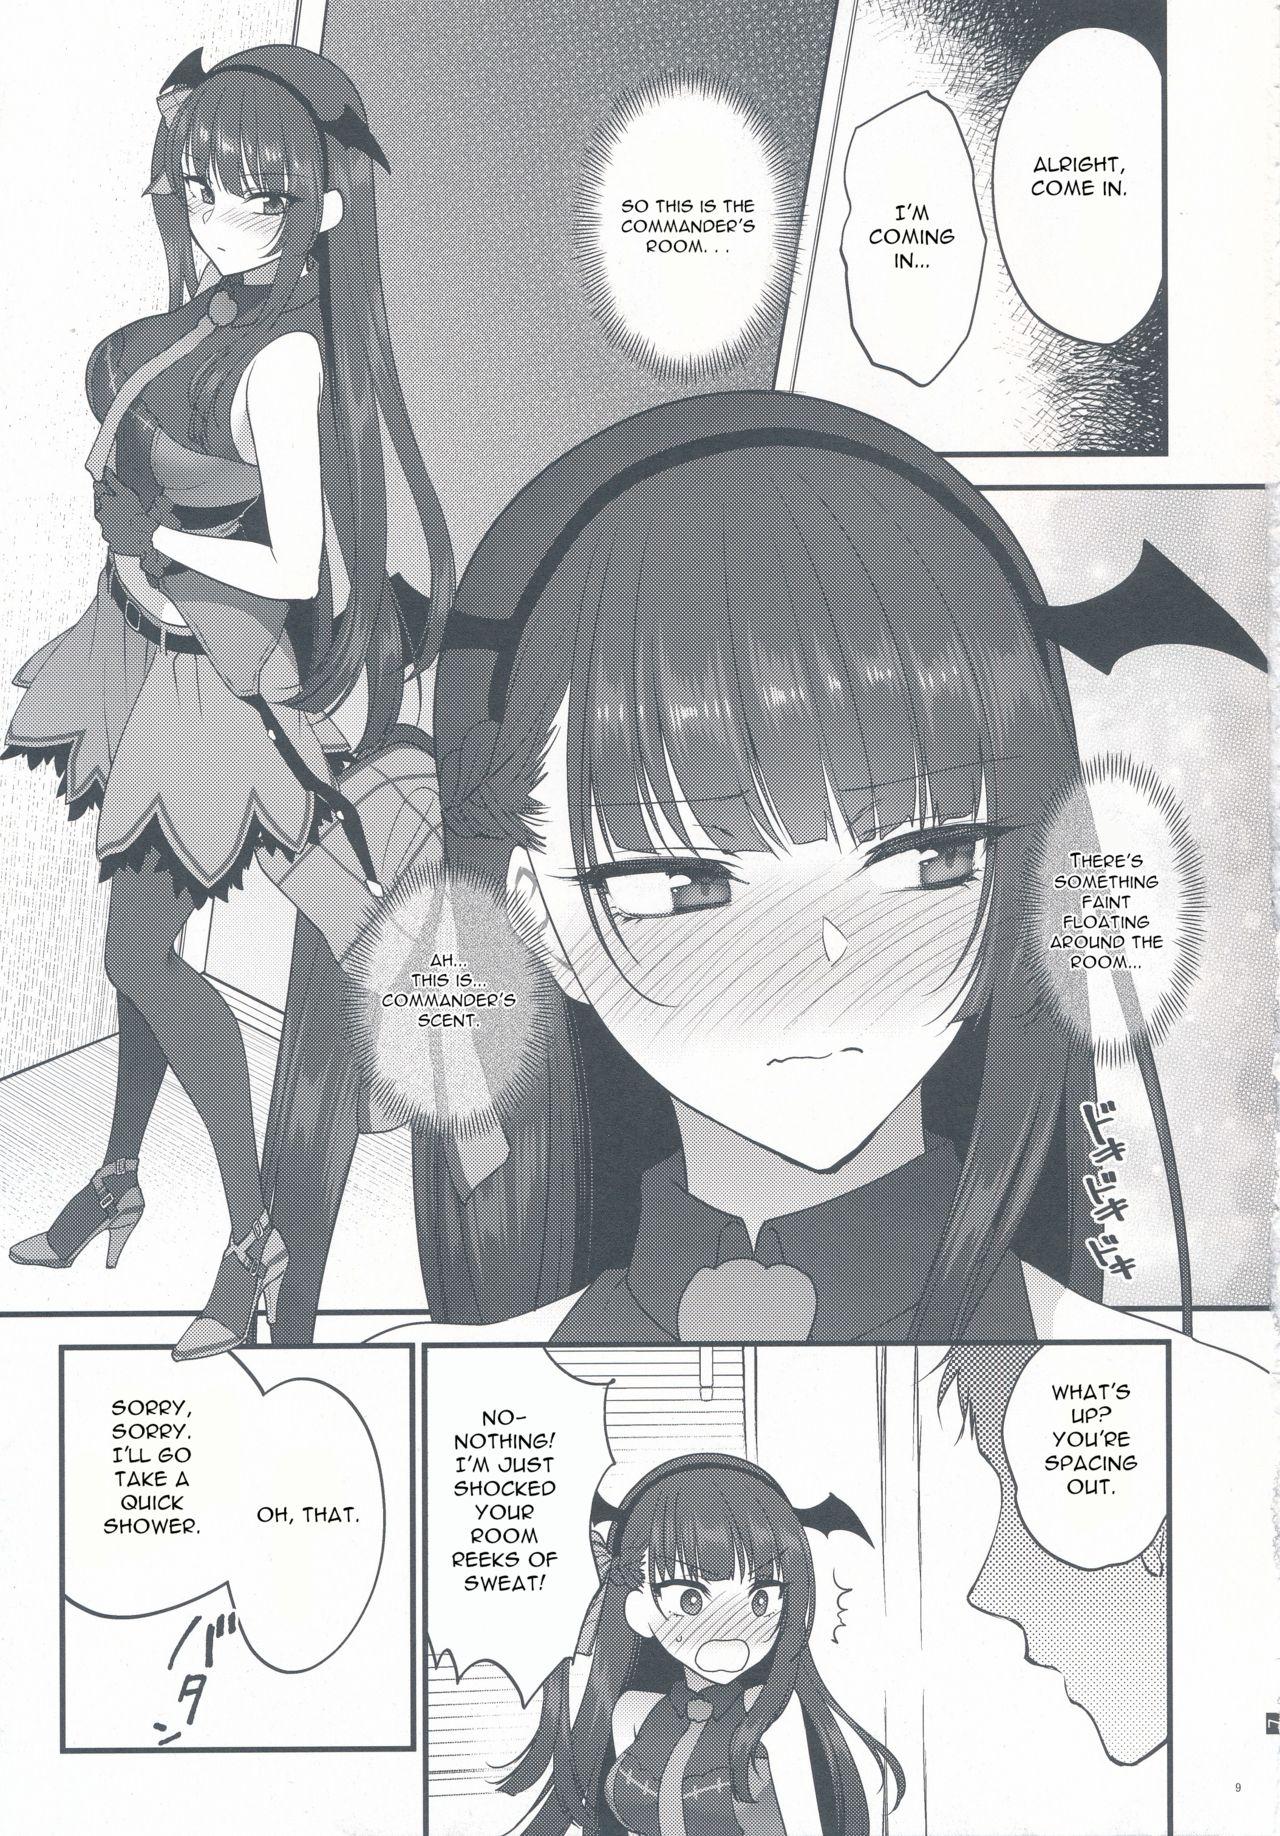 Best Blowjobs Obake nante Inai! - Girls frontline Pussyeating - Page 9